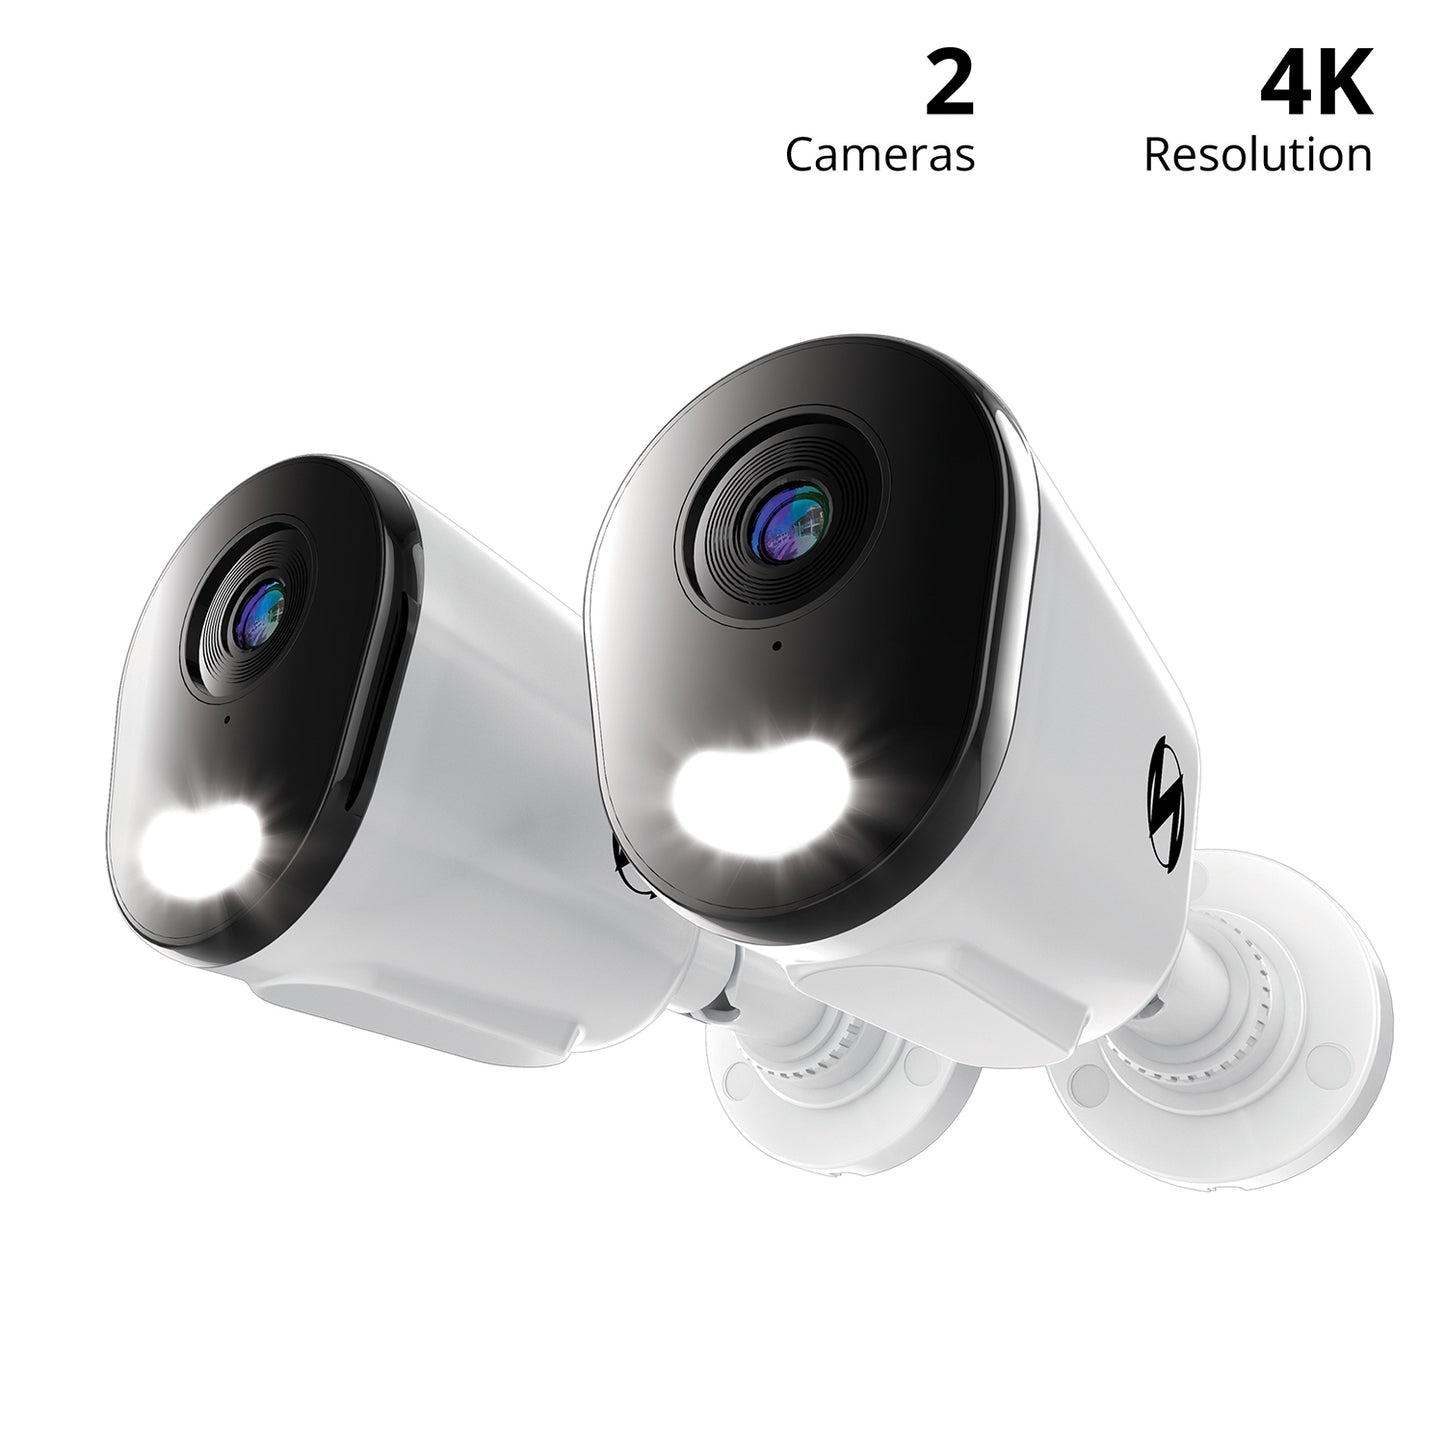 Add On Wired IP 4K Deterrence Cameras with 2-Way Audio - 2 Pack - White